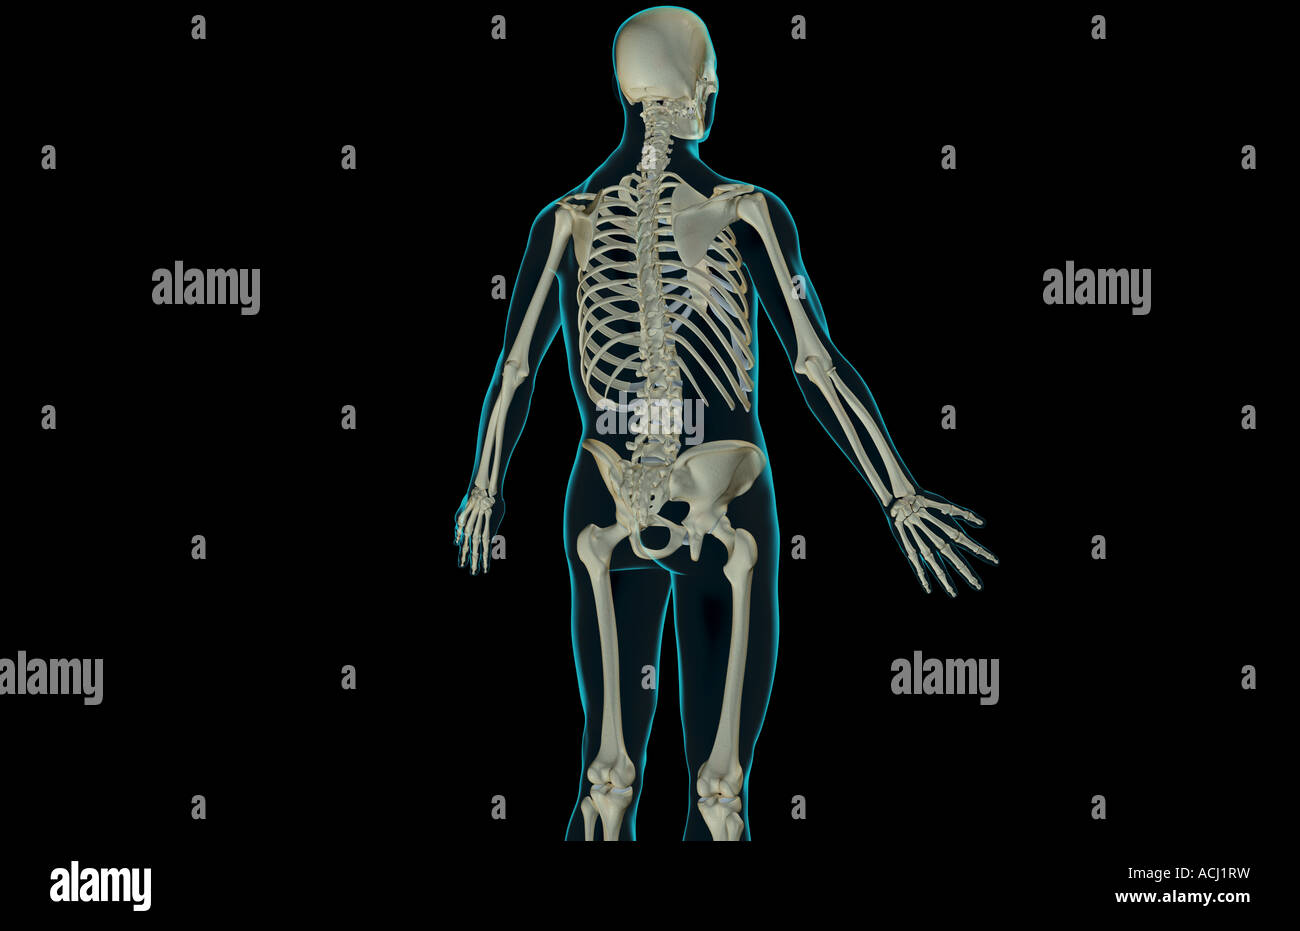 Upper Body Bone Structure High Resolution Stock Photography and Images